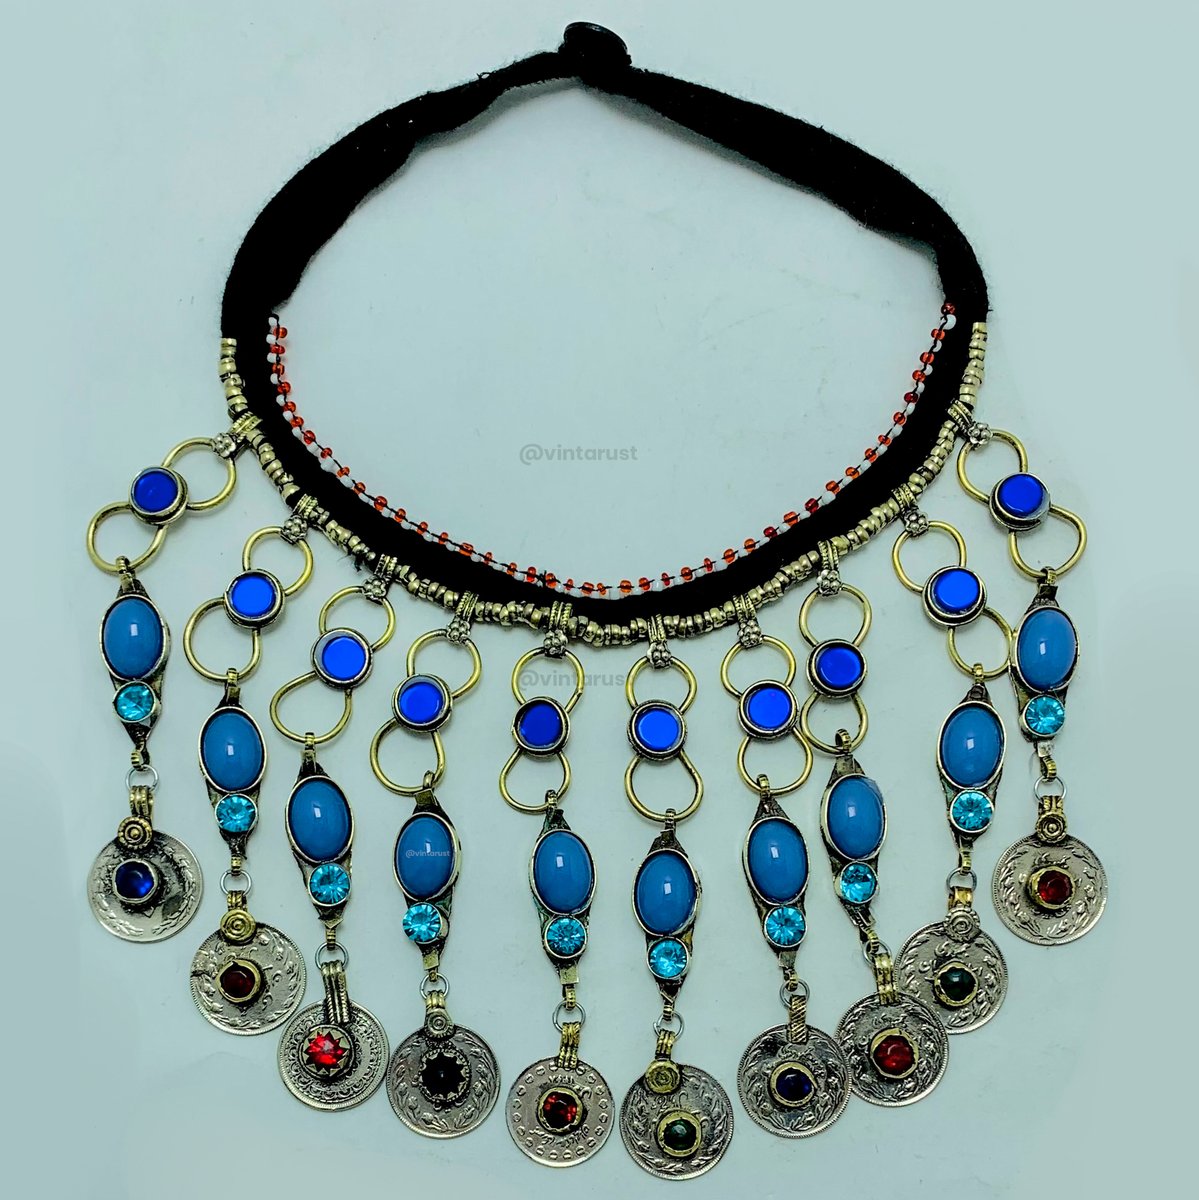 Tribal Dangling Coins Choker Necklace.

Shop Now:
buff.ly/3ORvZCD

#ethnicjewelry #turquoiselove #statementpiece #royalelegance #handcraftedgems #trendylook #fashionicon #vintarust #uniquestyle #coinschoker #coinnecklace #statementpiece #bohojewelry #trendyaccessories